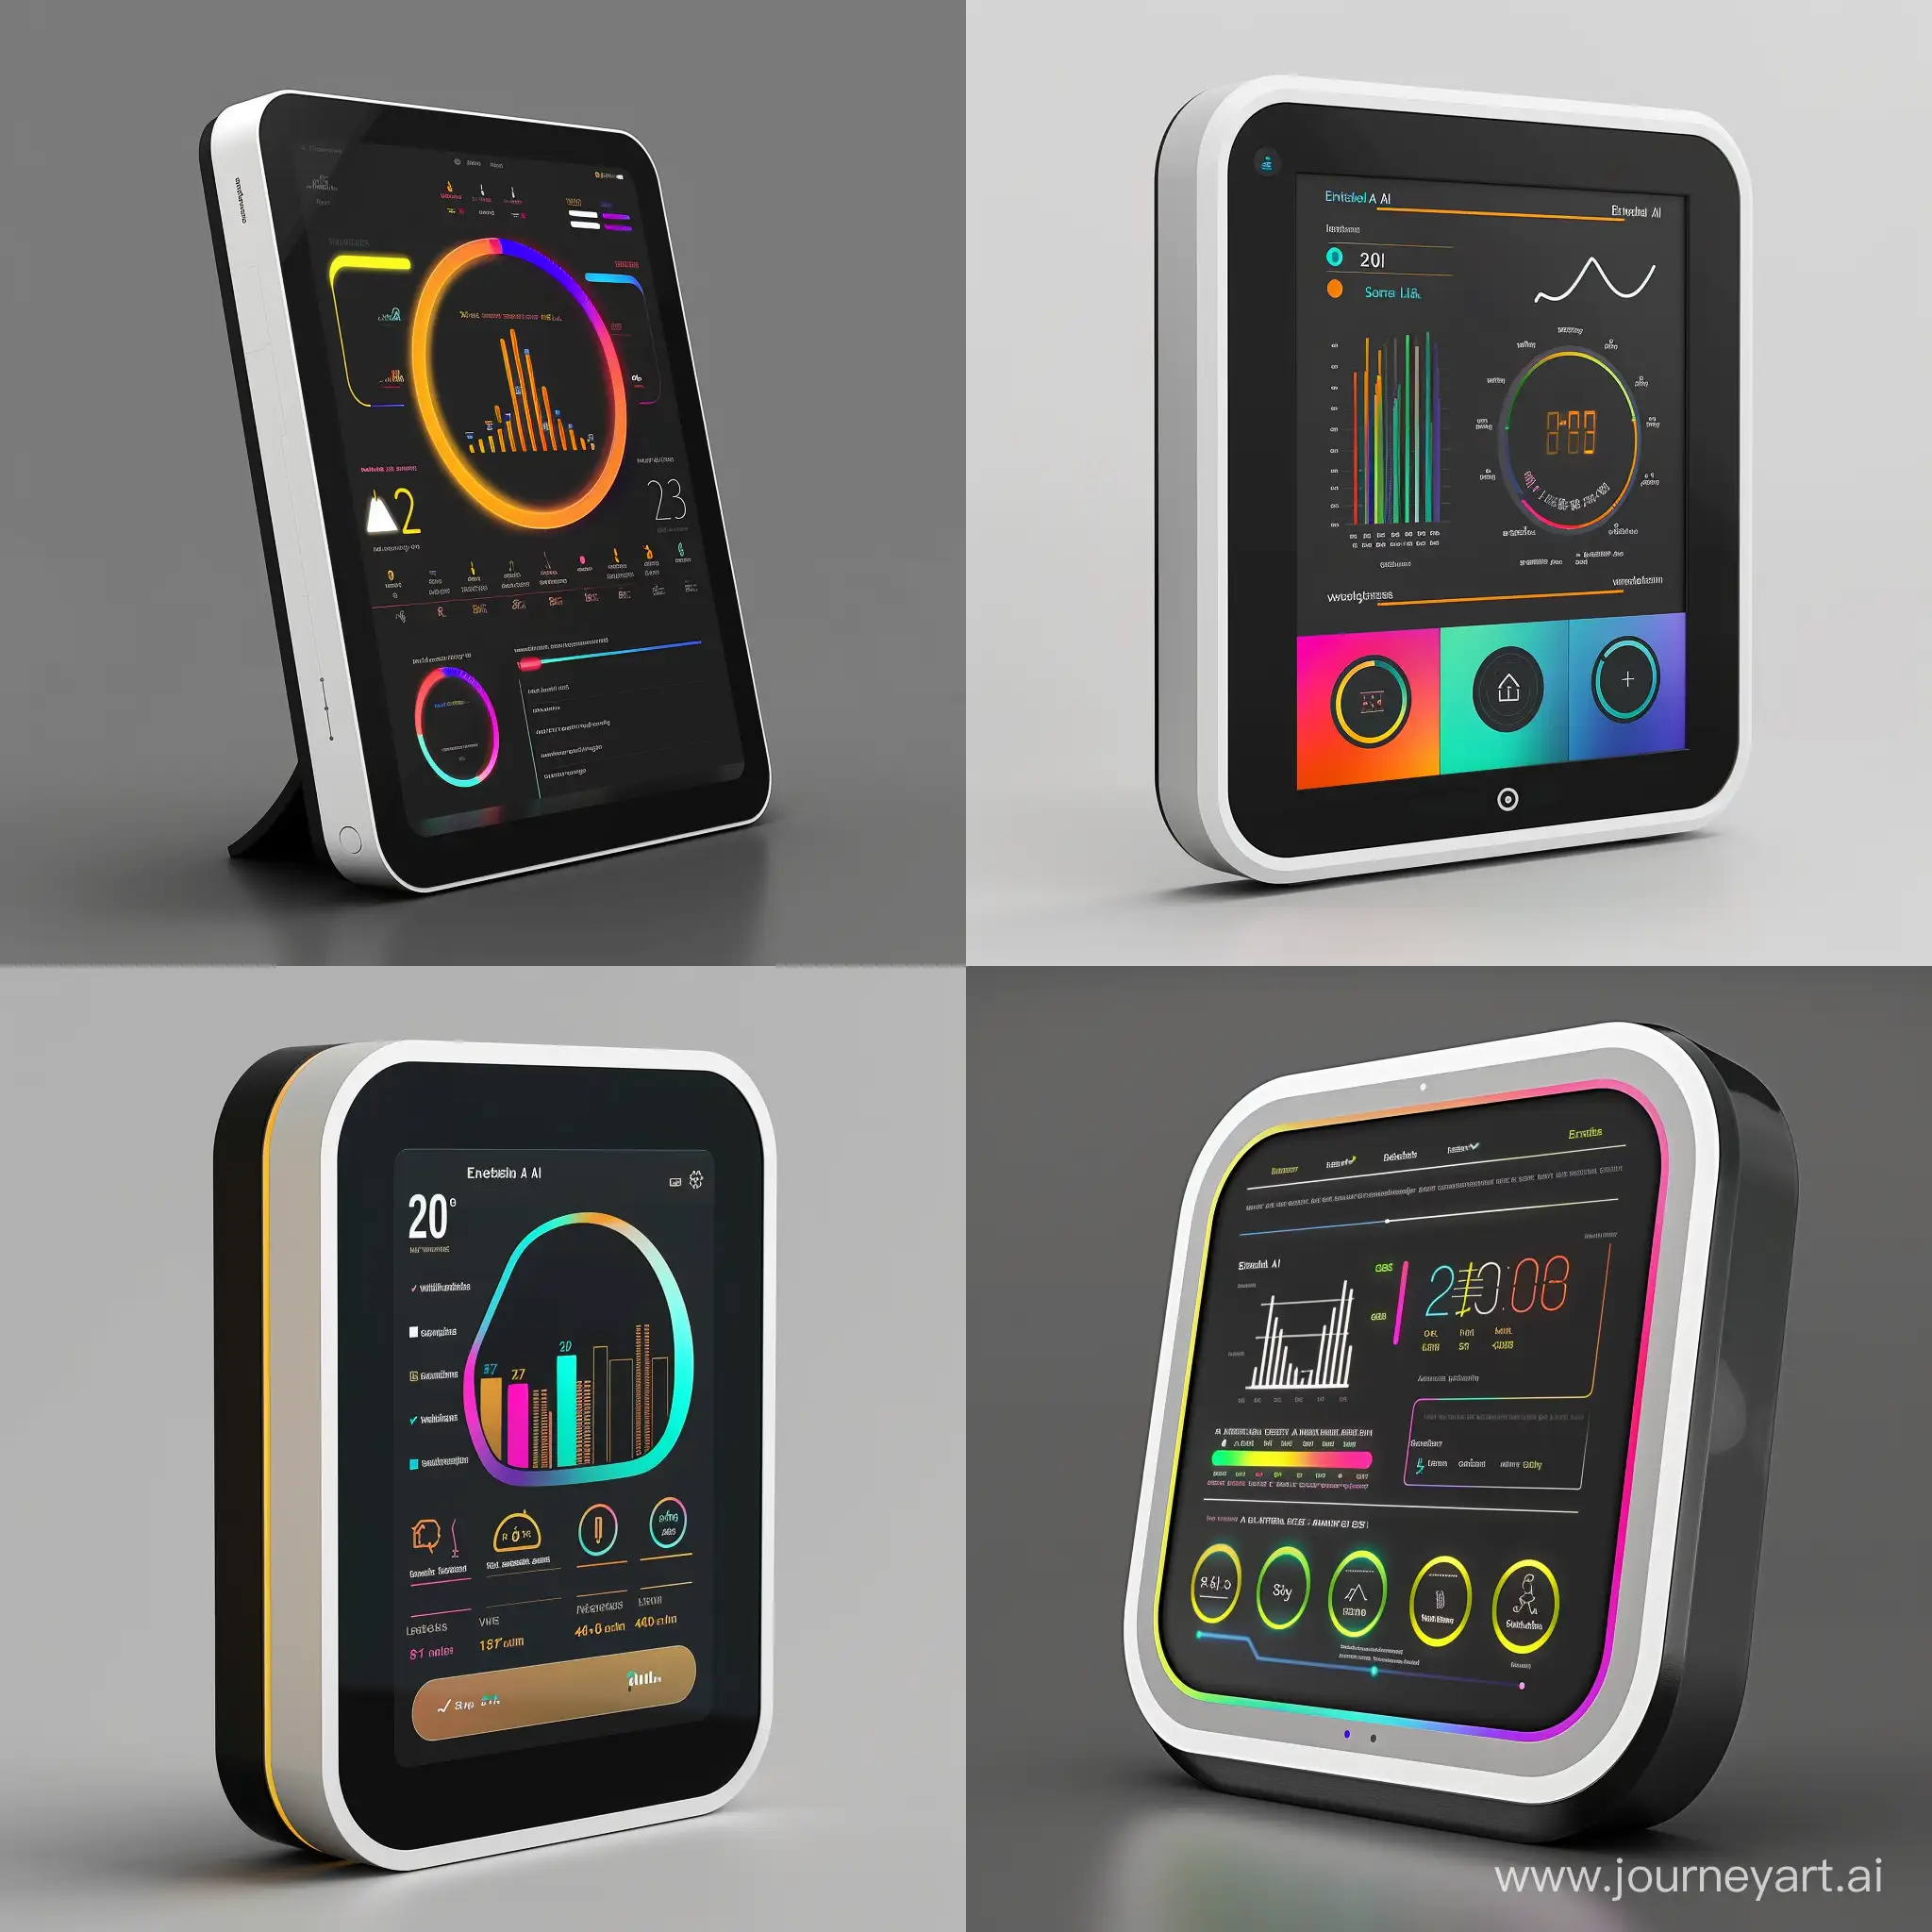 "Envision a Standalone AI Smart Energy Hub designed to autonomously manage home energy usage with elegance and innovation. Picture a compact device, measuring 20 cm in width, 15 cm in height, and 3 cm in depth, with a high-resolution, scratch-resistant glass touchscreen display. The hub should be crafted from eco-friendly materials like recycled aluminum or bioplastic, featuring a matte finish in a choice of colors such as classic matte black, white, or vibrant options to suit various interior designs. The design is minimalistic, focusing on sleek lines and a user-friendly interface that displays real-time energy consumption, predictive analytics, and personalized energy-saving recommendations with vibrant visualizations. This device is equipped with advanced sensors for monitoring environmental conditions and energy usage, using AI to optimize household energy efficiency. It stands or mounts elegantly in any room, offering an intuitive, easy-to-use system that enhances the home's energy management without the need for integration with other smart devices. The hub also includes optional remote connectivity for smartphone app control, adding convenience for users who choose to engage remotely. Visualize this hub as a centerpiece of sustainable technology, combining functionality with a modern aesthetic appeal, symbolizing a commitment to environmental responsibility and cutting-edge home energy management."photorealistic product design style